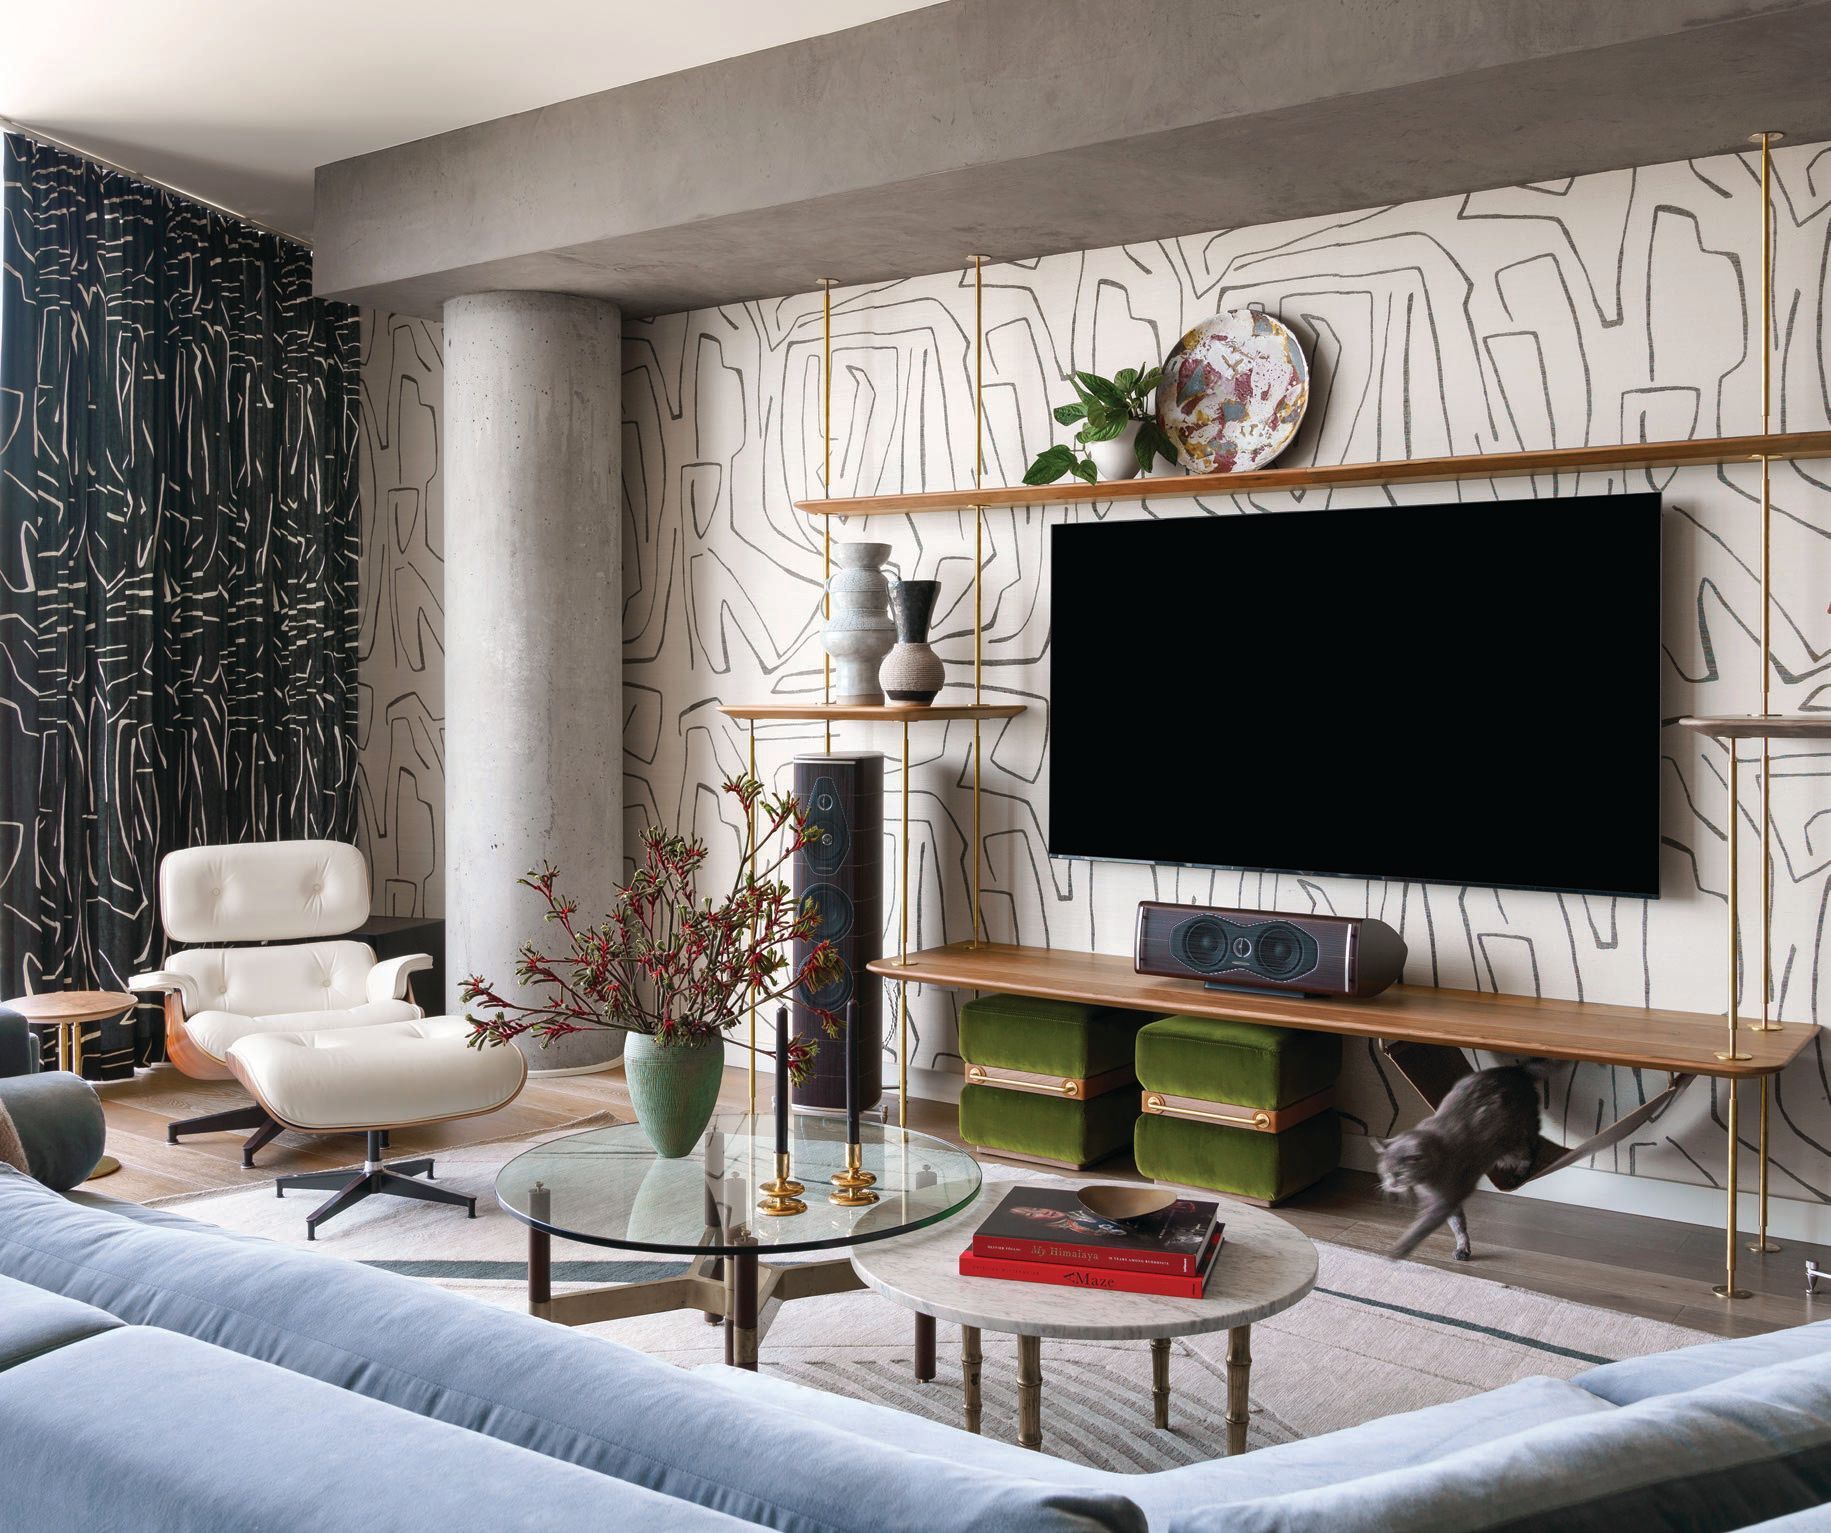 Kelly Wearstler wallcovering in the living room makes a statement. PHOTO STYLIST: ADAM FORTNER